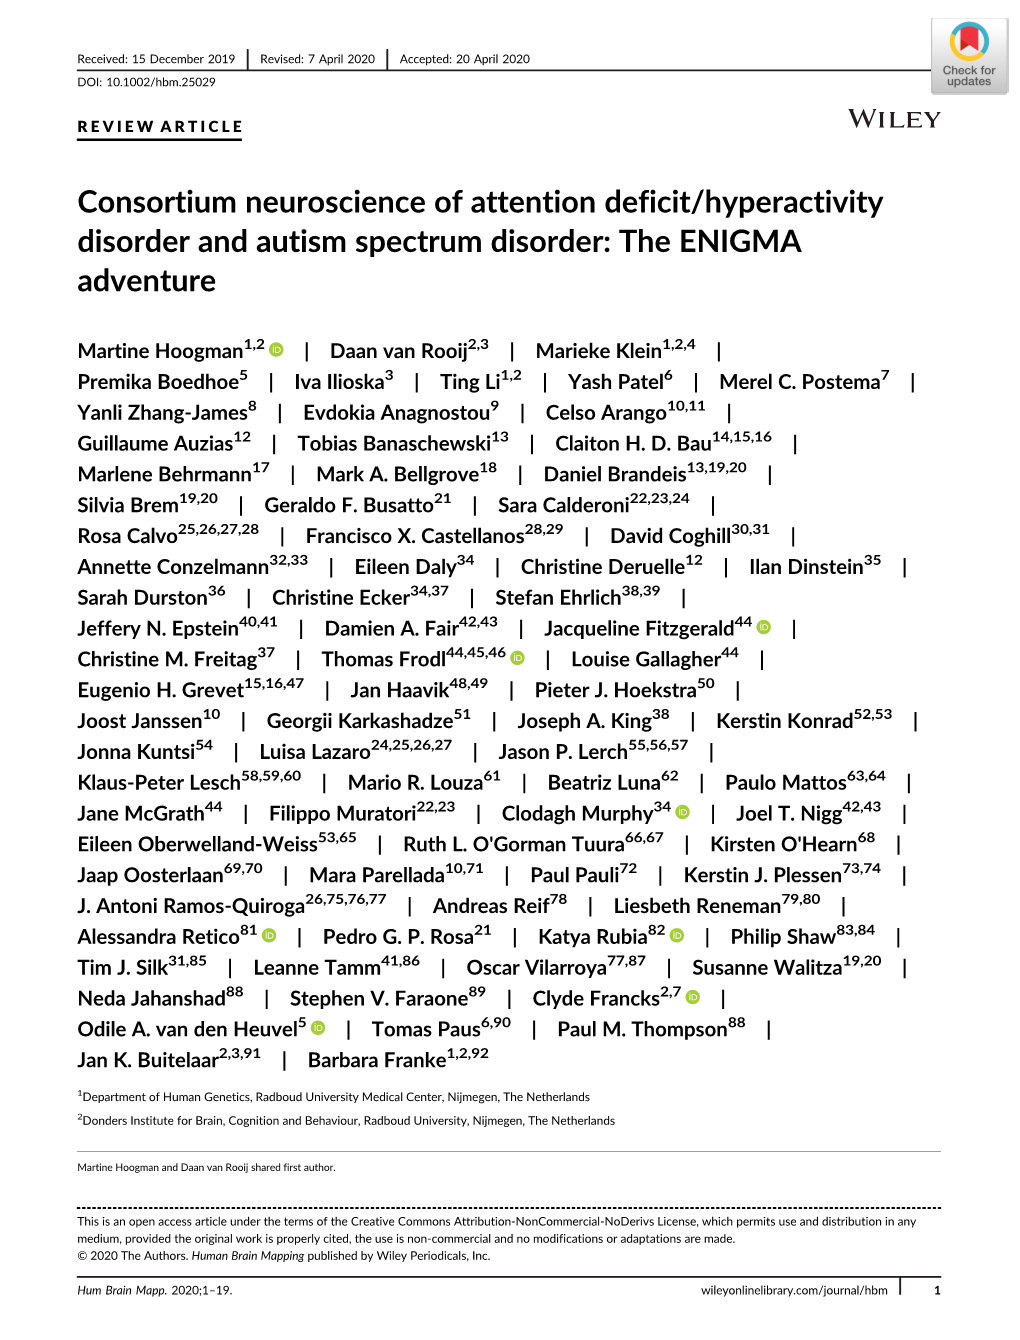 Consortium Neuroscience of Attention Deficit/Hyperactivity Disorder and Autism Spectrum Disorder: the ENIGMA Adventure